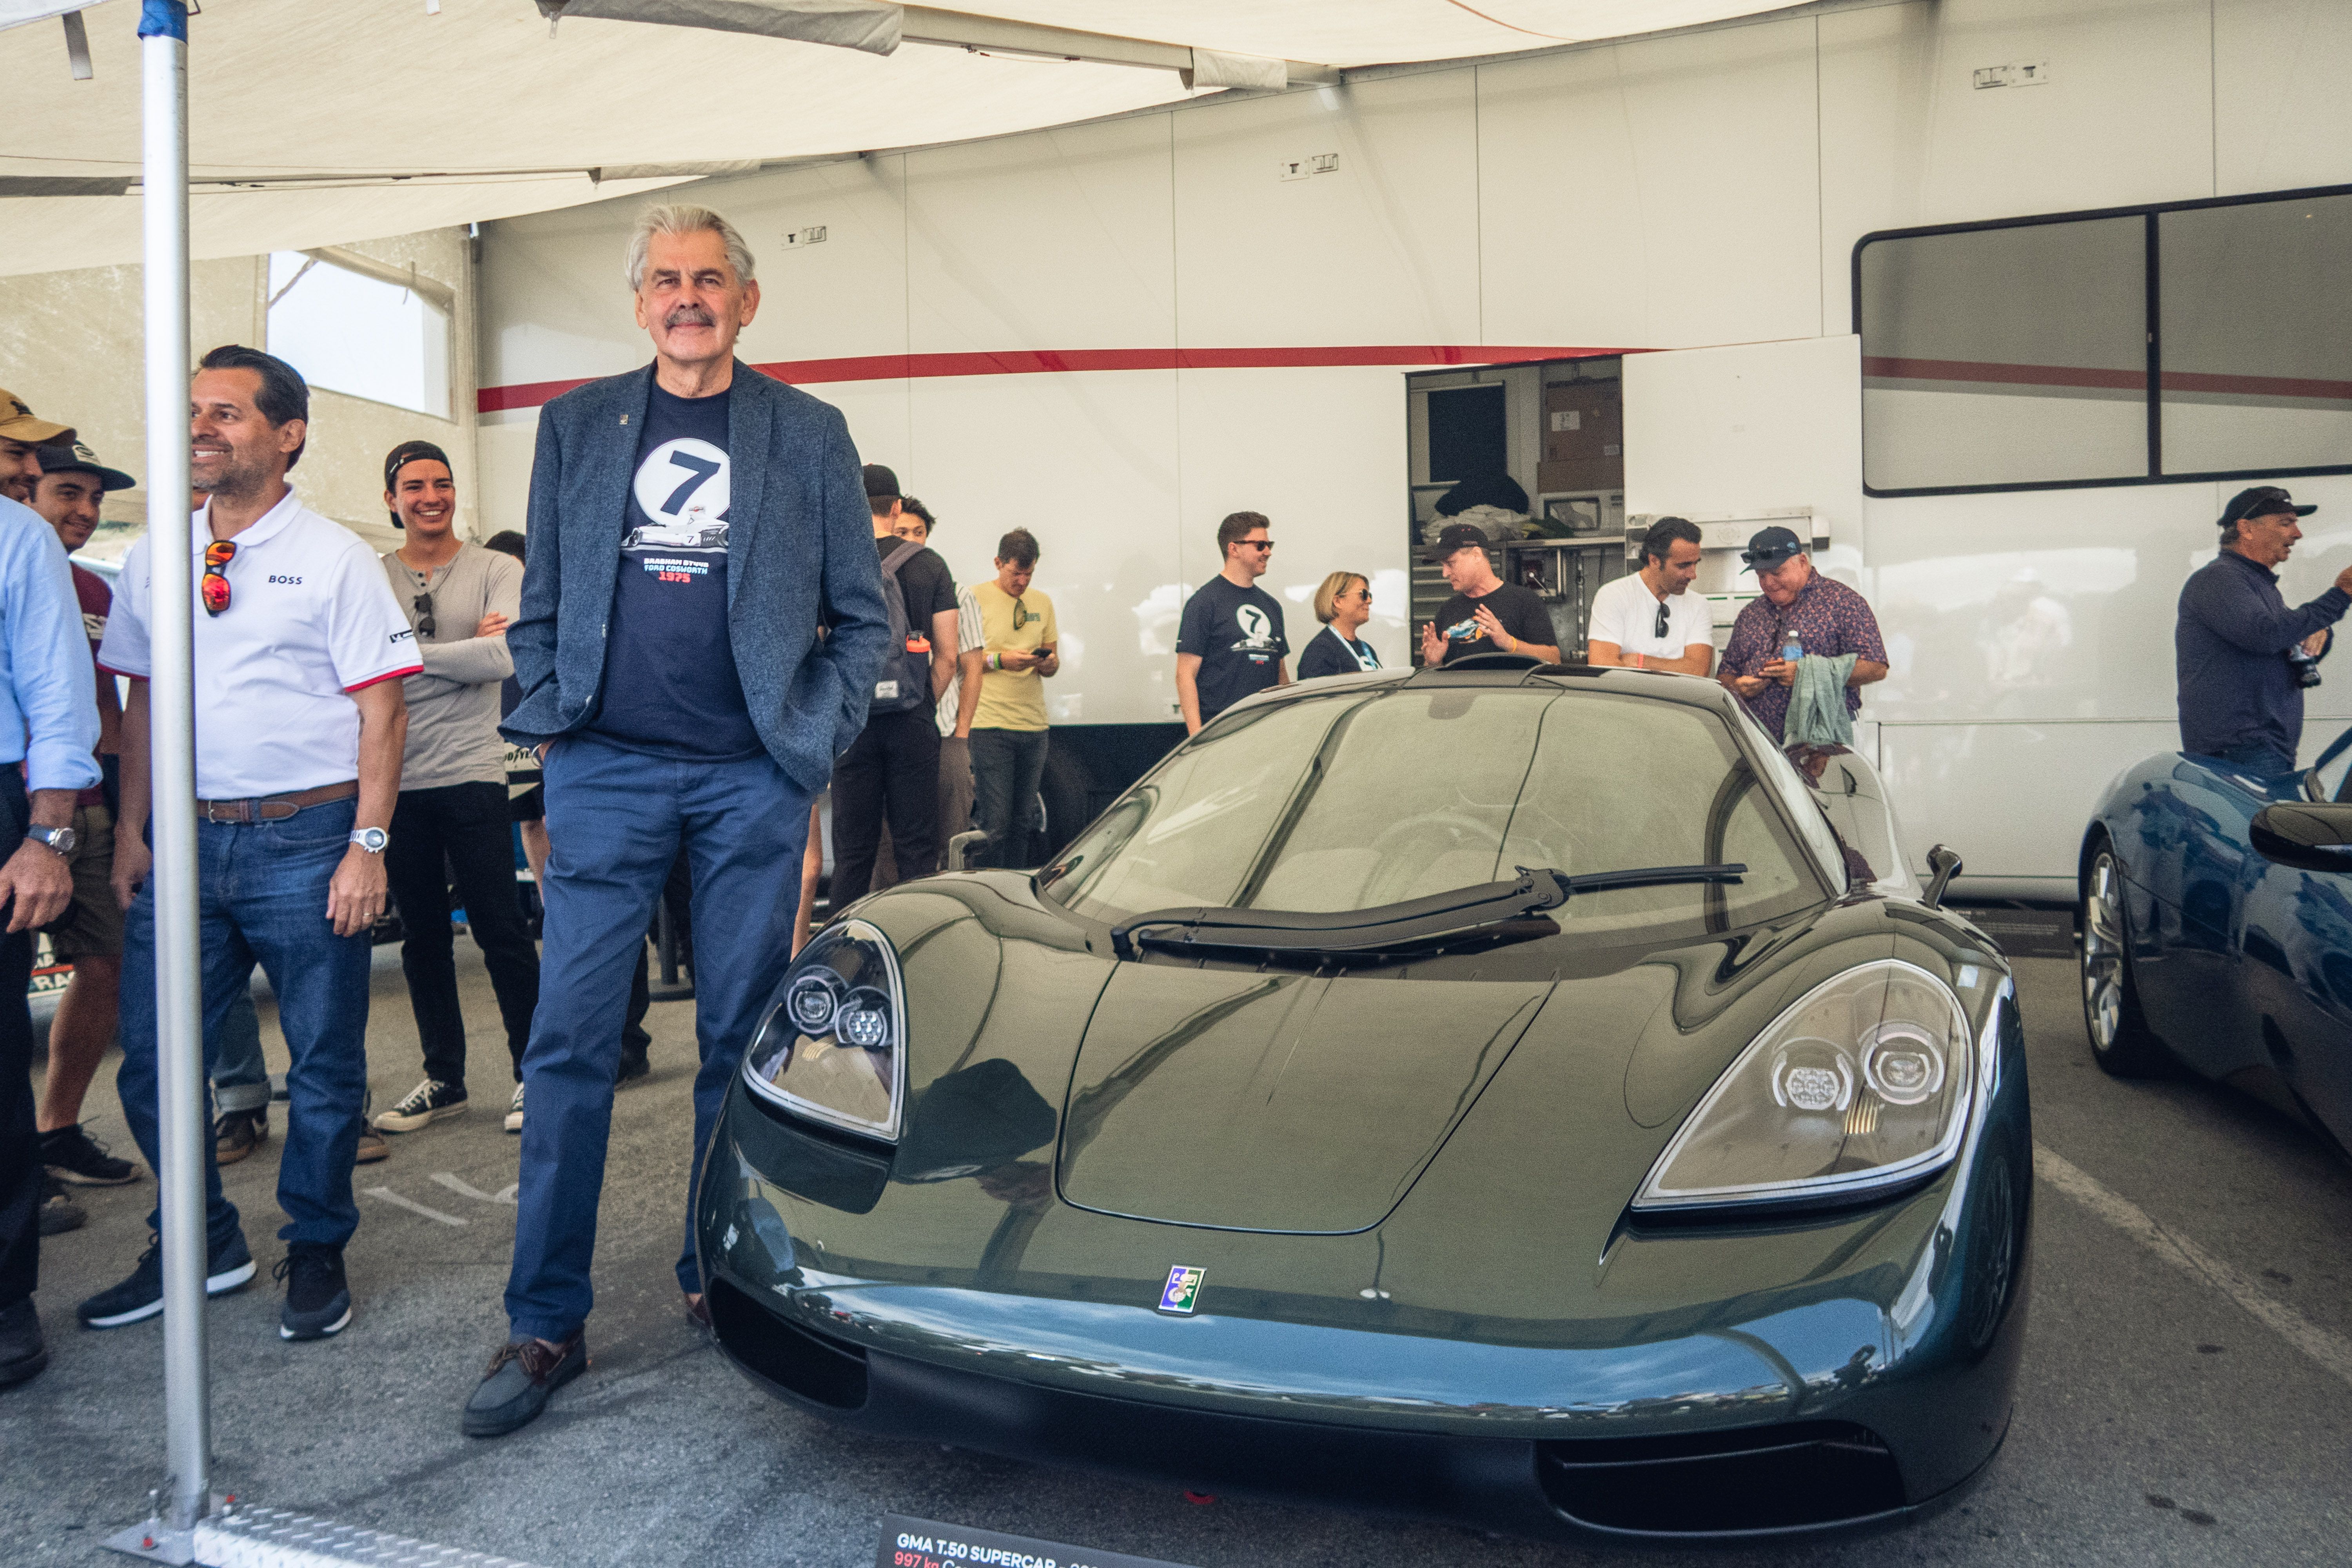 10 things you should know about Gordon Murray - Hagerty Media